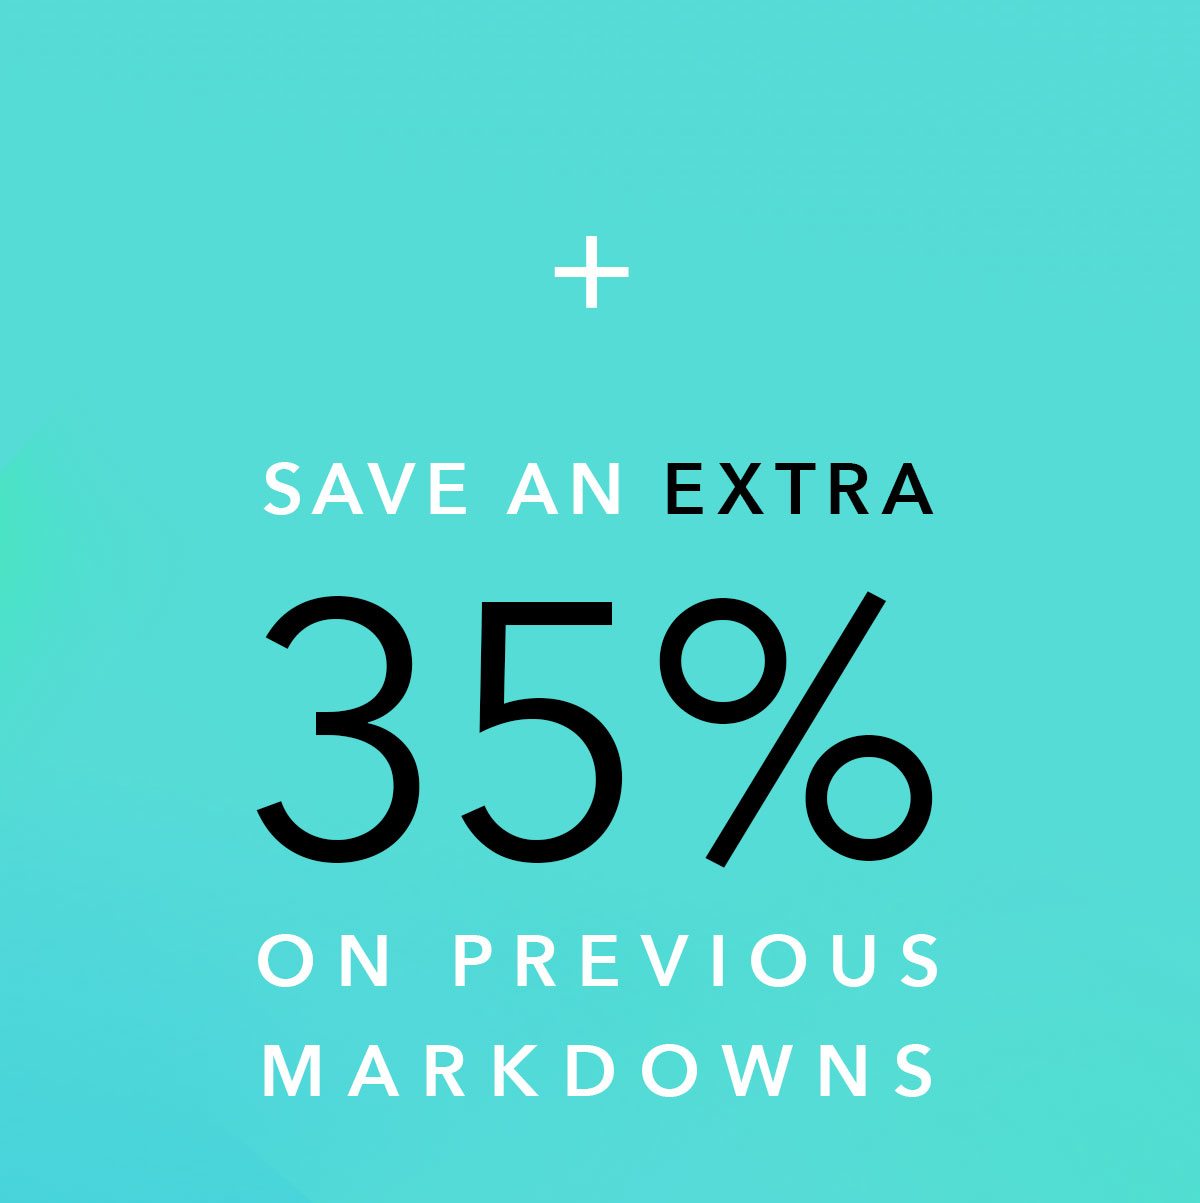 Plus save an extra 35 percent on pervious markdowns